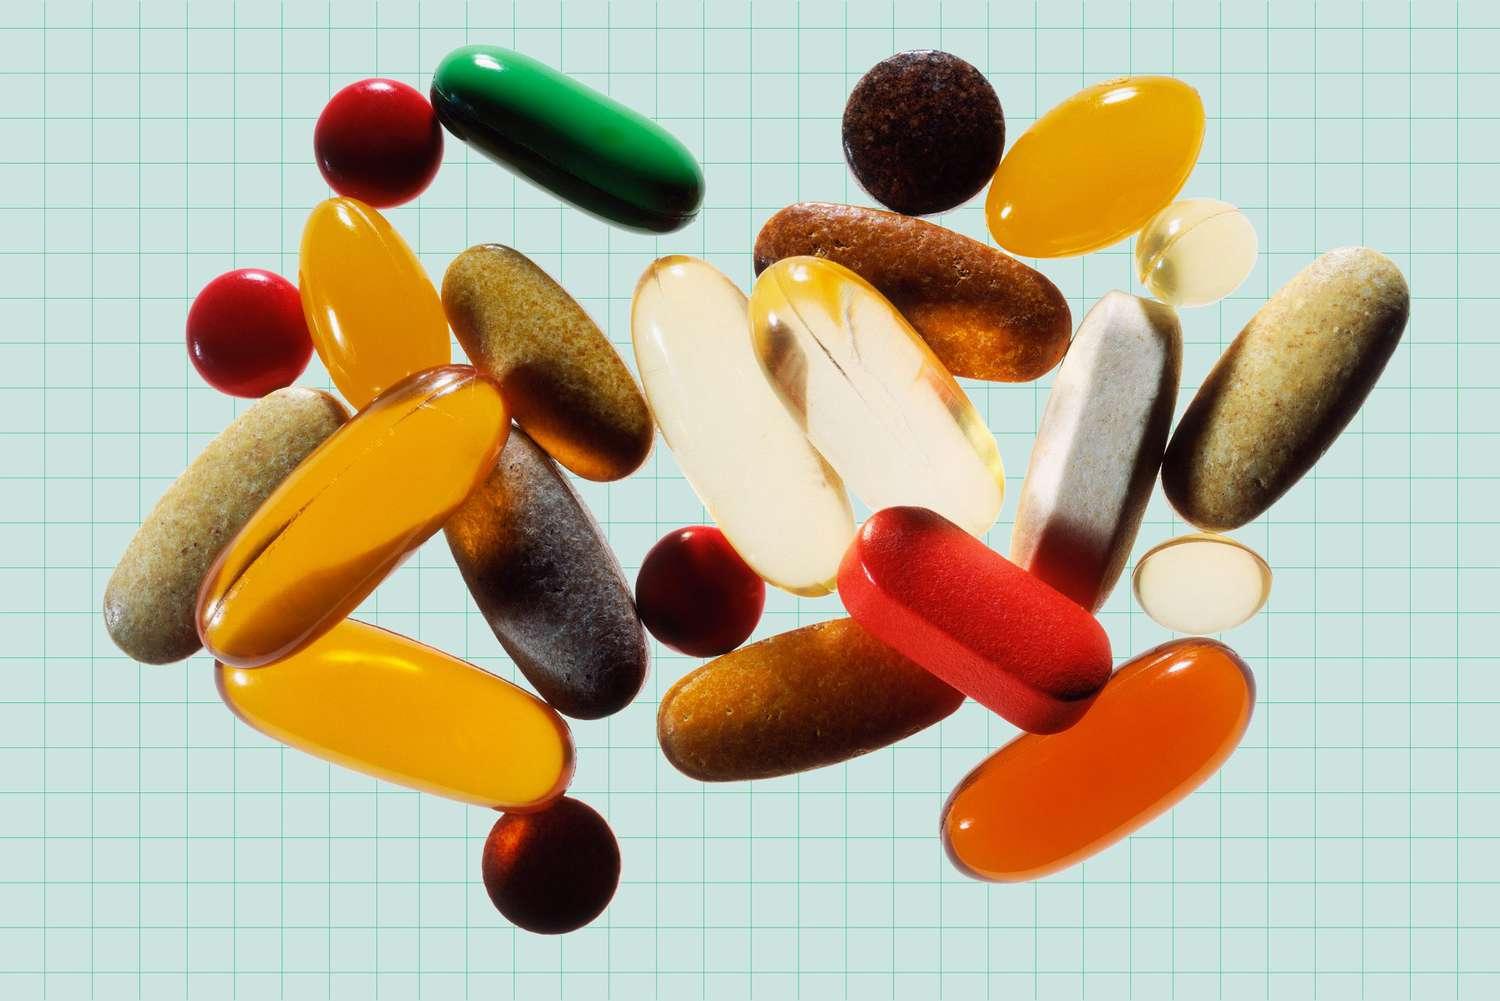 A variety of pills and capsules on a blue-green graph paper background.